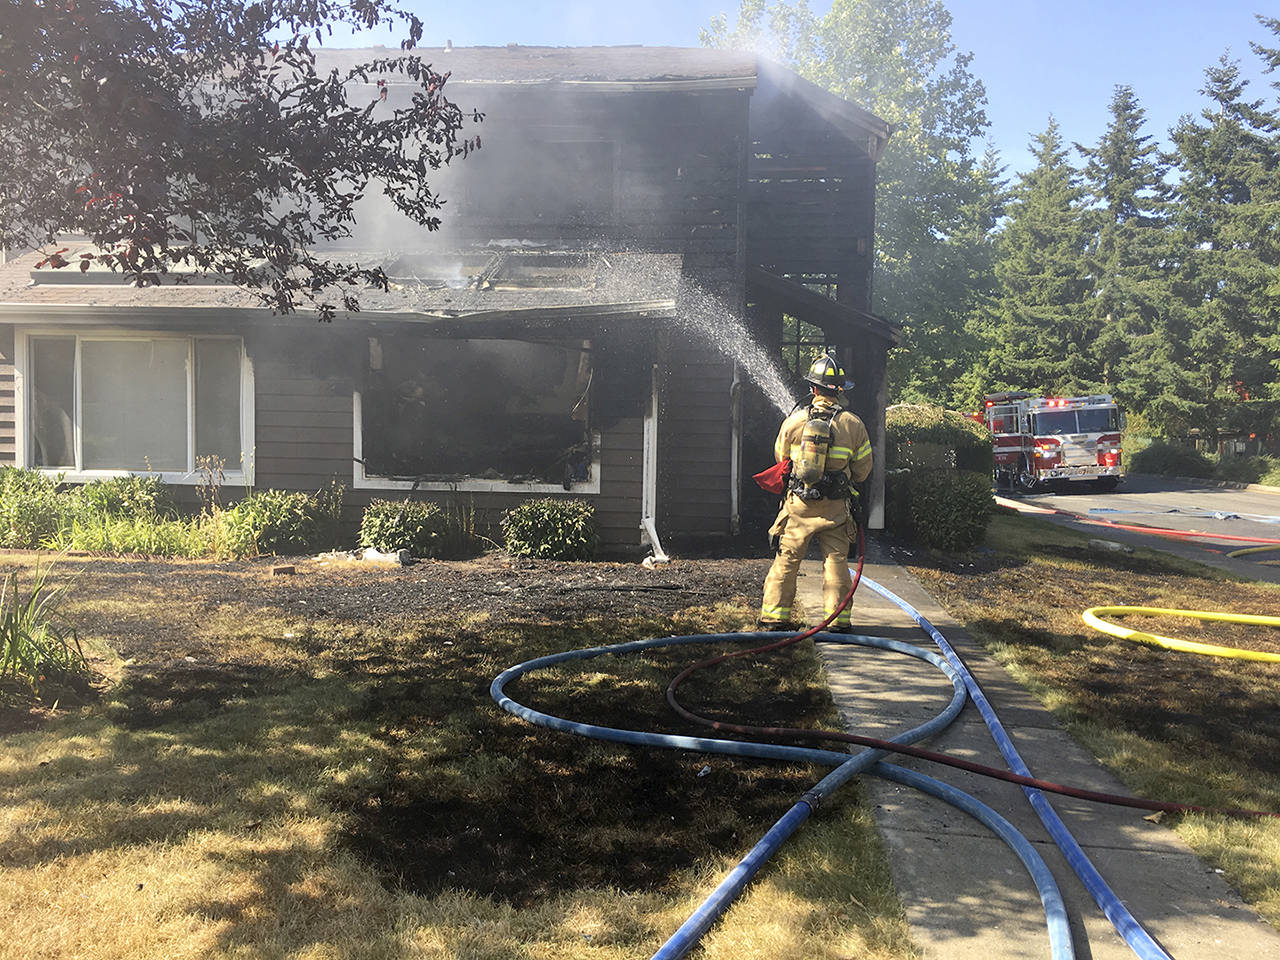 Crews douse a house fire south of Everett on Saturday. (Snohomish County Fire District 1)